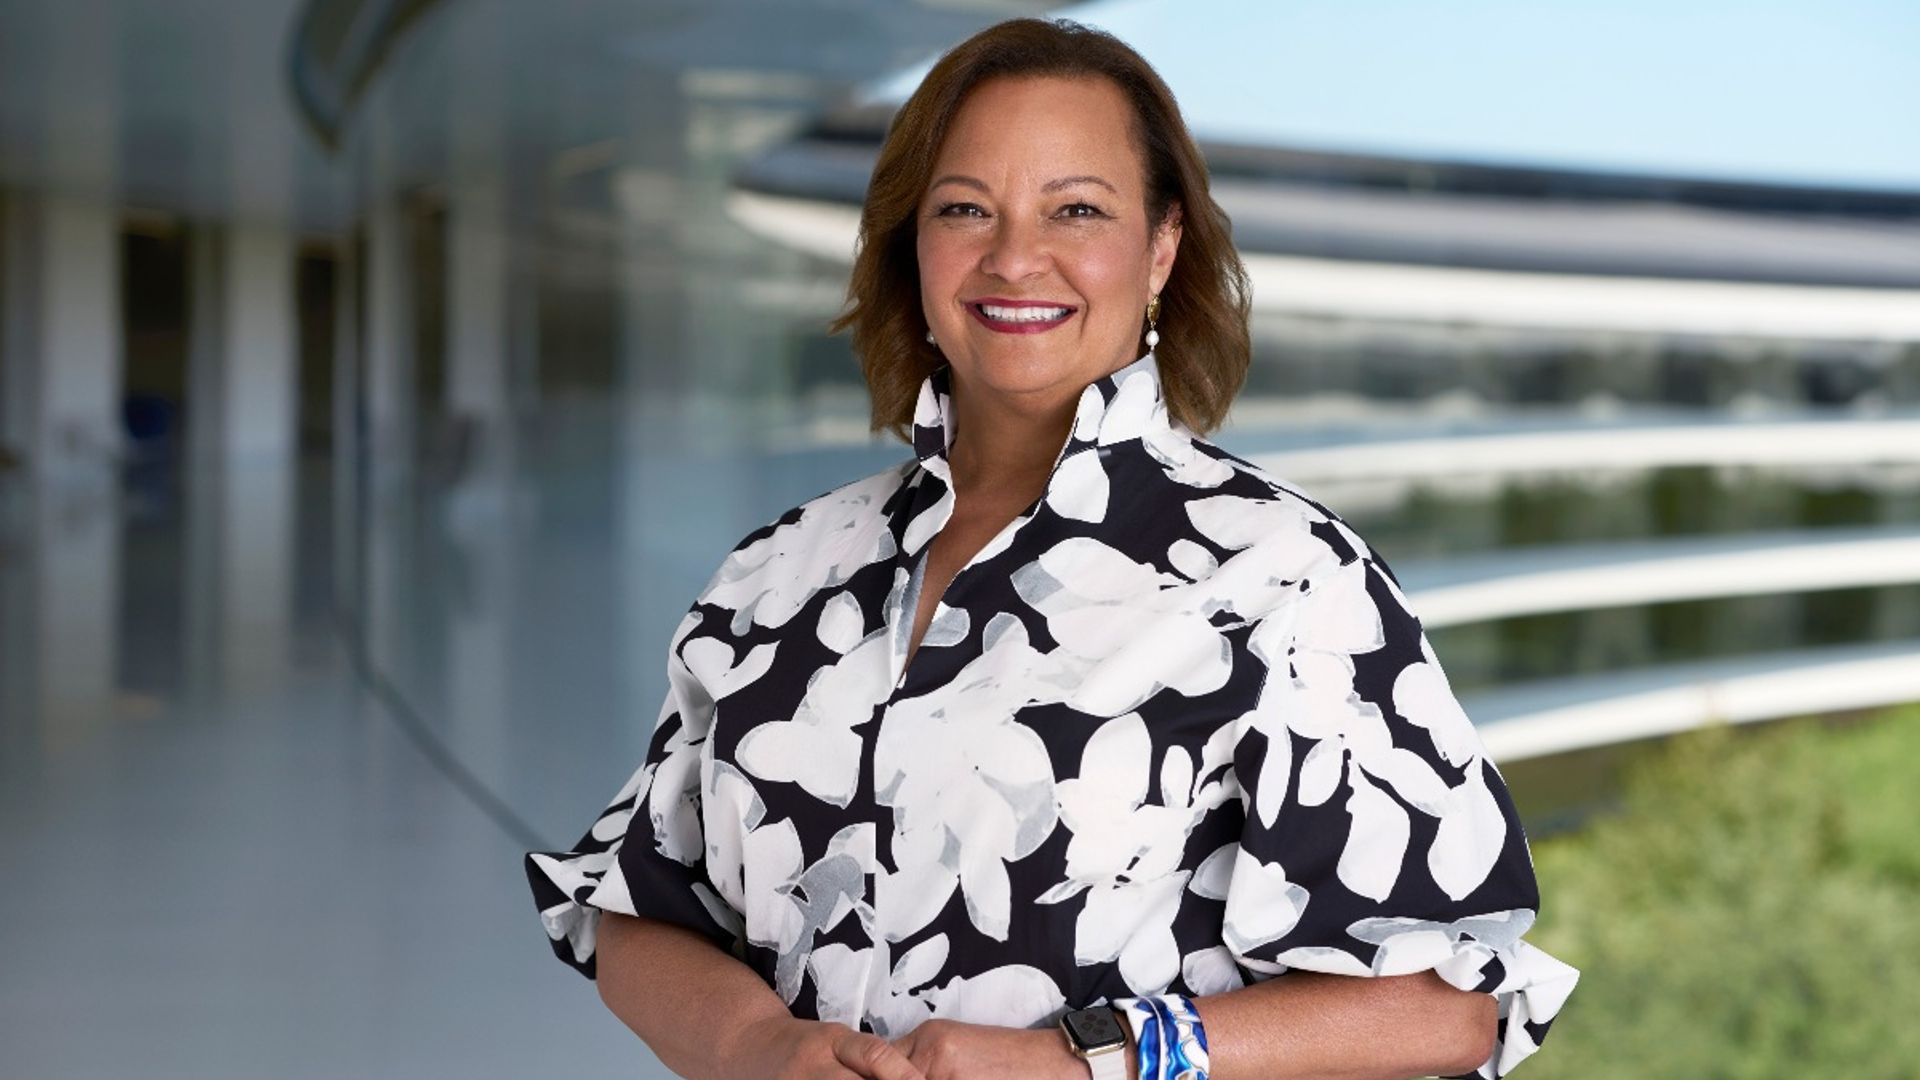 Apple’s Vice President of Environment Lisa Jackson wants to save the world by 2030 - and here’s how to help